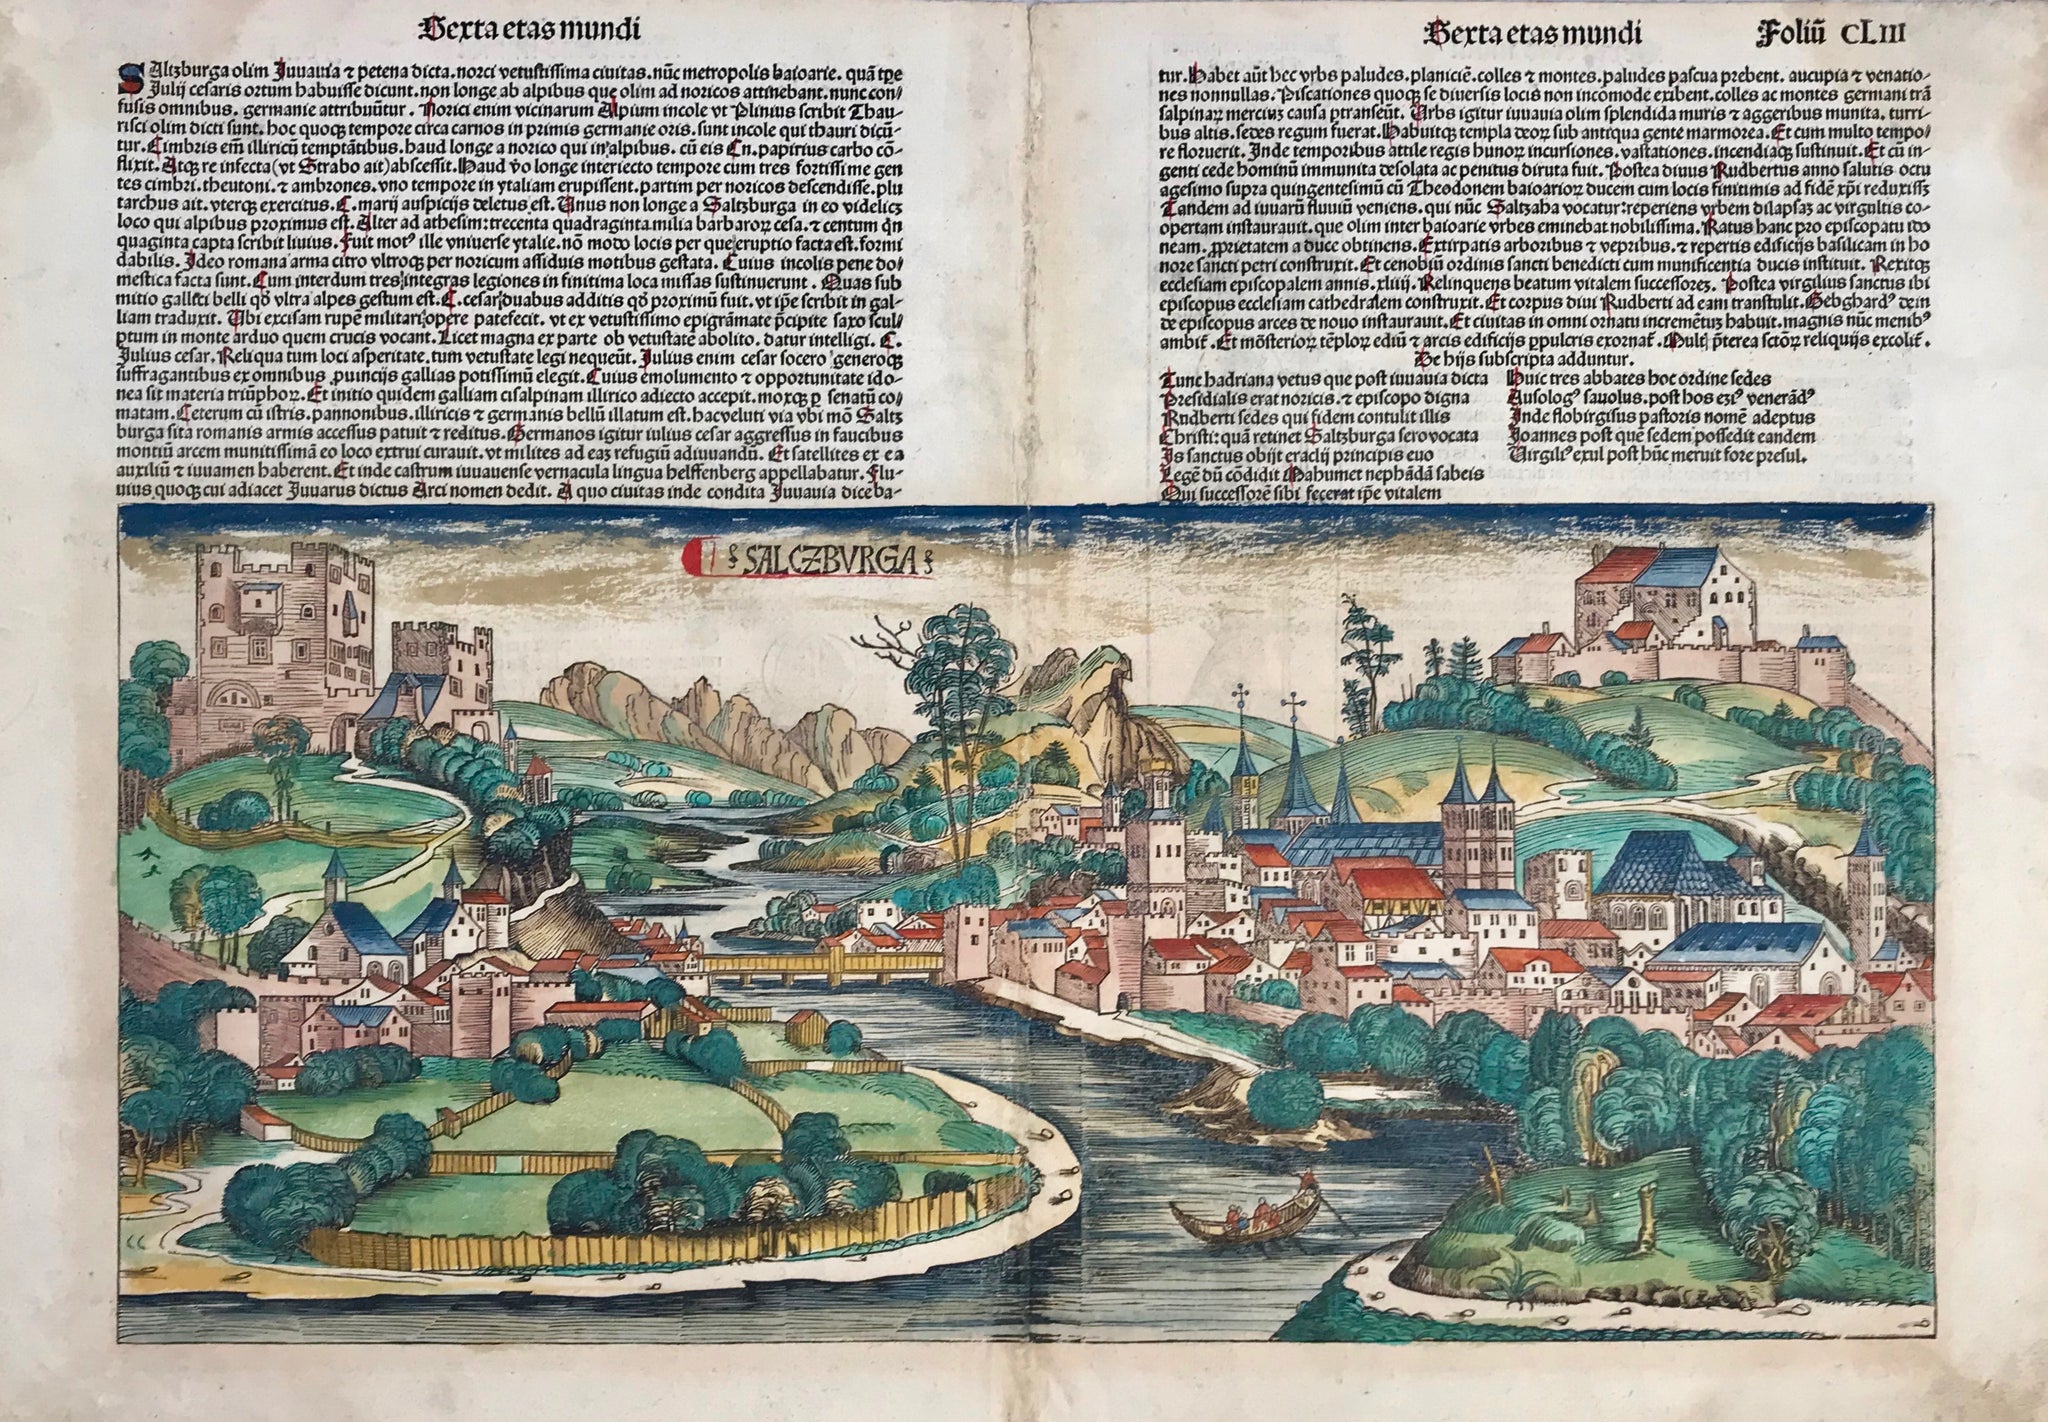 "Salczburga" (Salzburg first view inprint)  General view of the famous Austrian city.  Woodcut. Original hand coloring. Text in Latin with some letters emphasized in red ink.  On the left reverse side are images of Popes and on the right side are images of Gallus abbas, Joanes gerudines eps, Eligius episcopus and Rupertus episcopus.